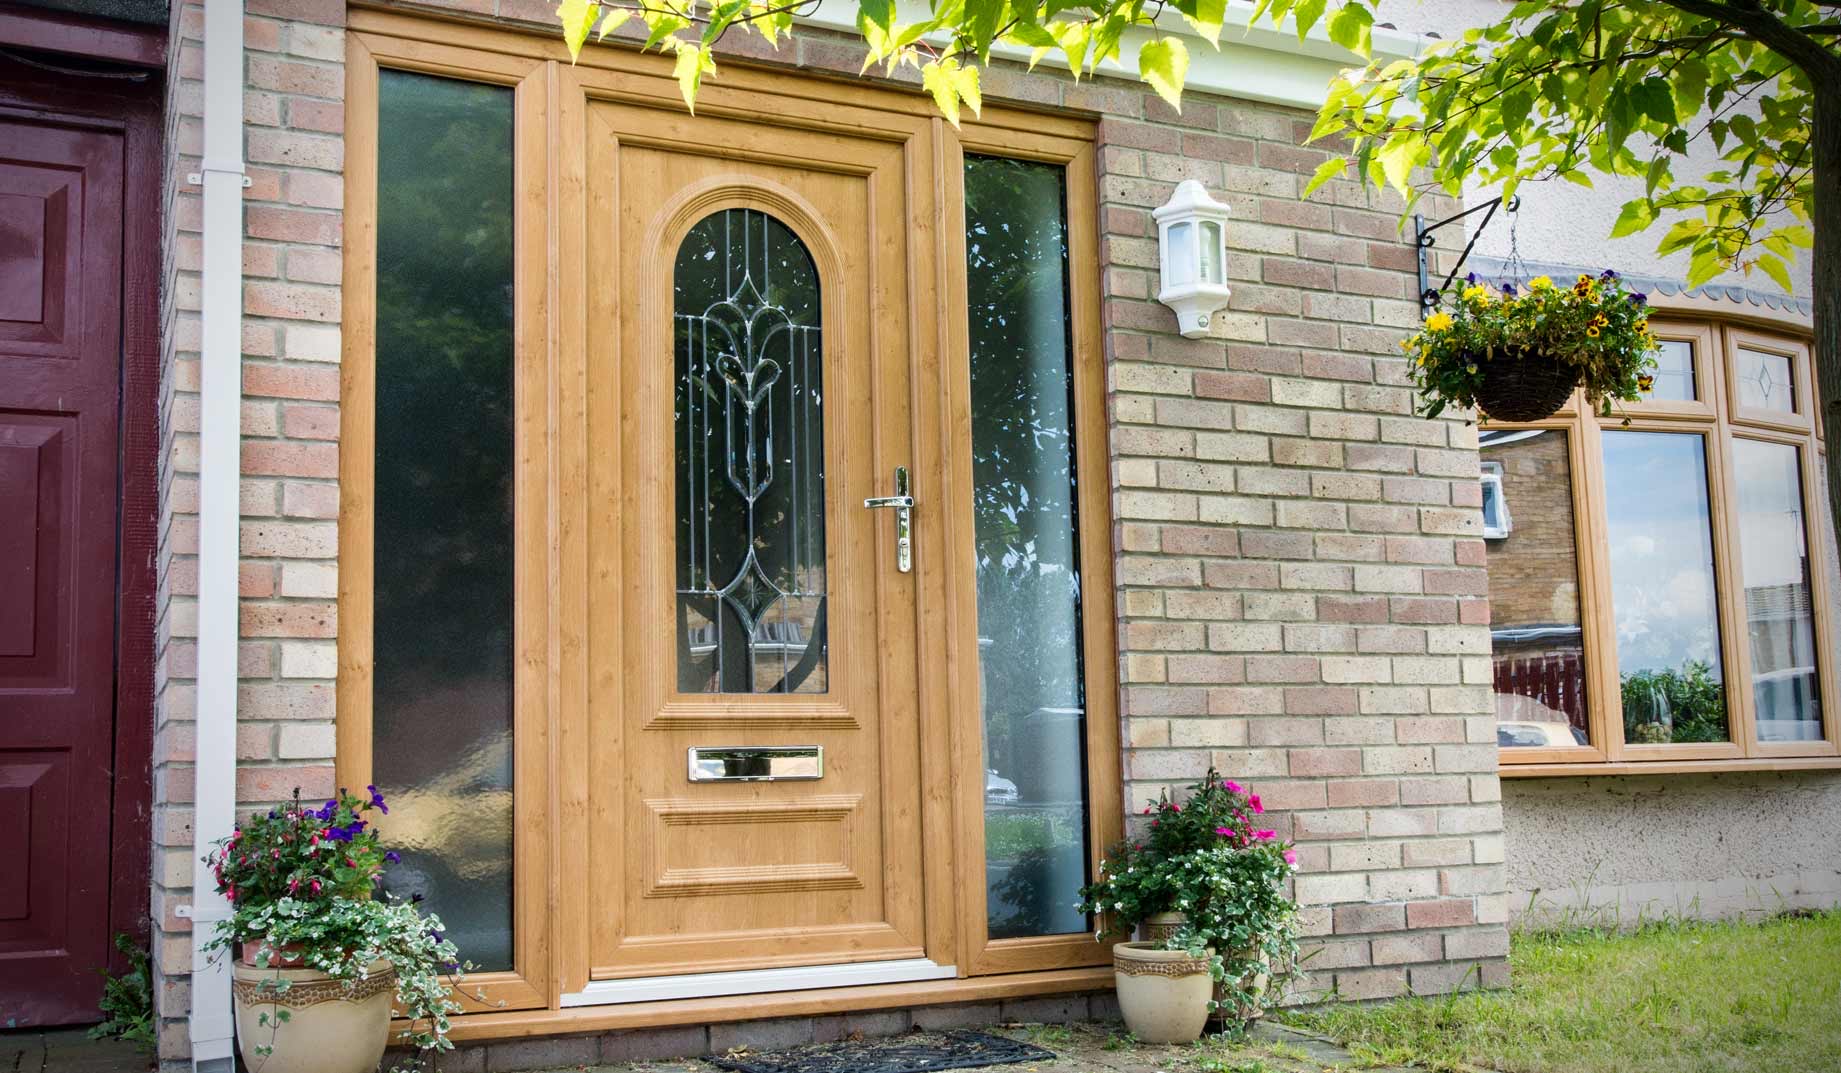 UPVC Doors in Glasgow Supplied and Fitted to Your Home’s Unique Requirements